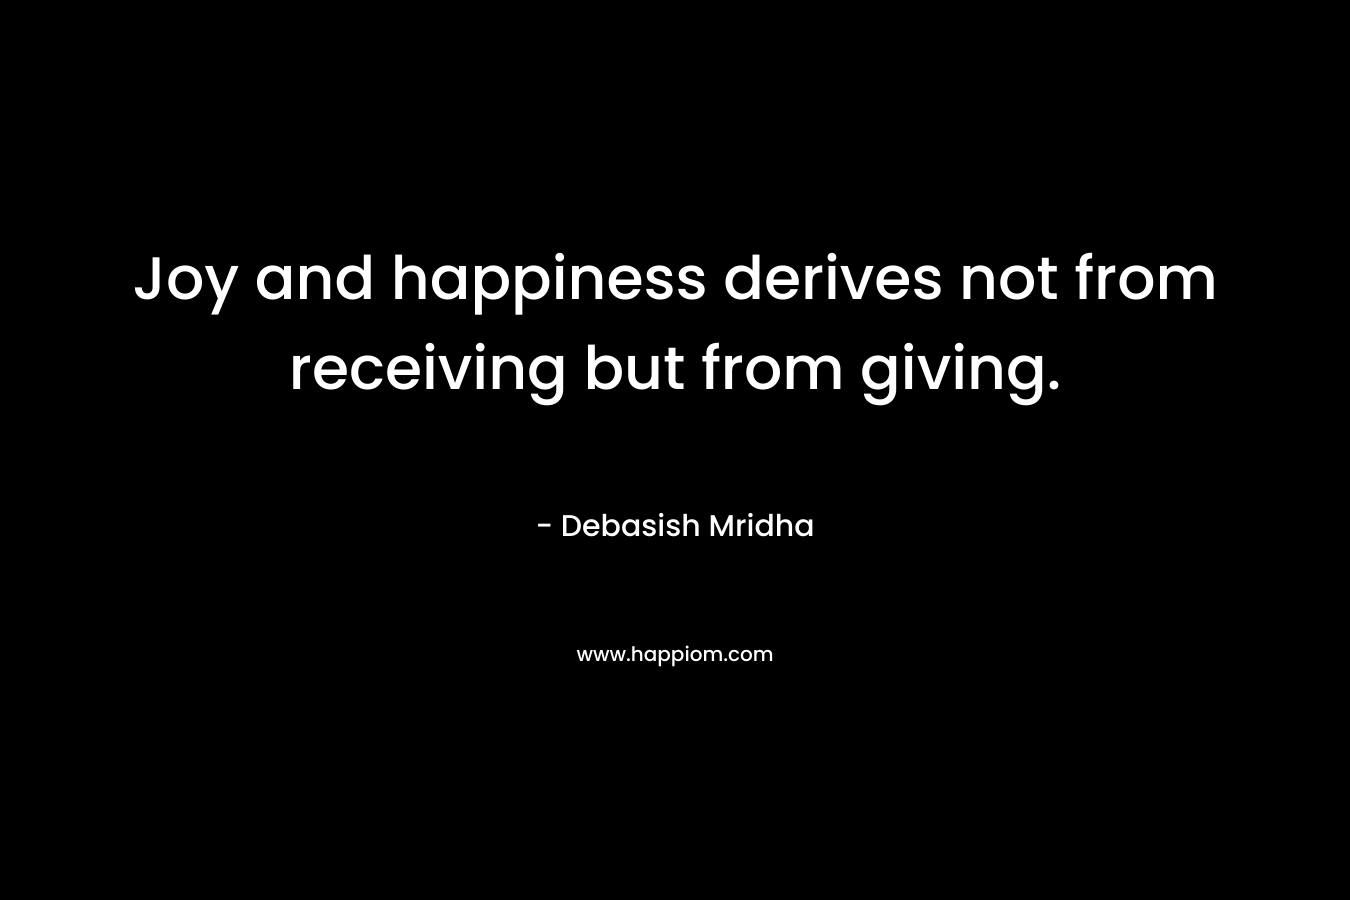 Joy and happiness derives not from receiving but from giving. – Debasish Mridha